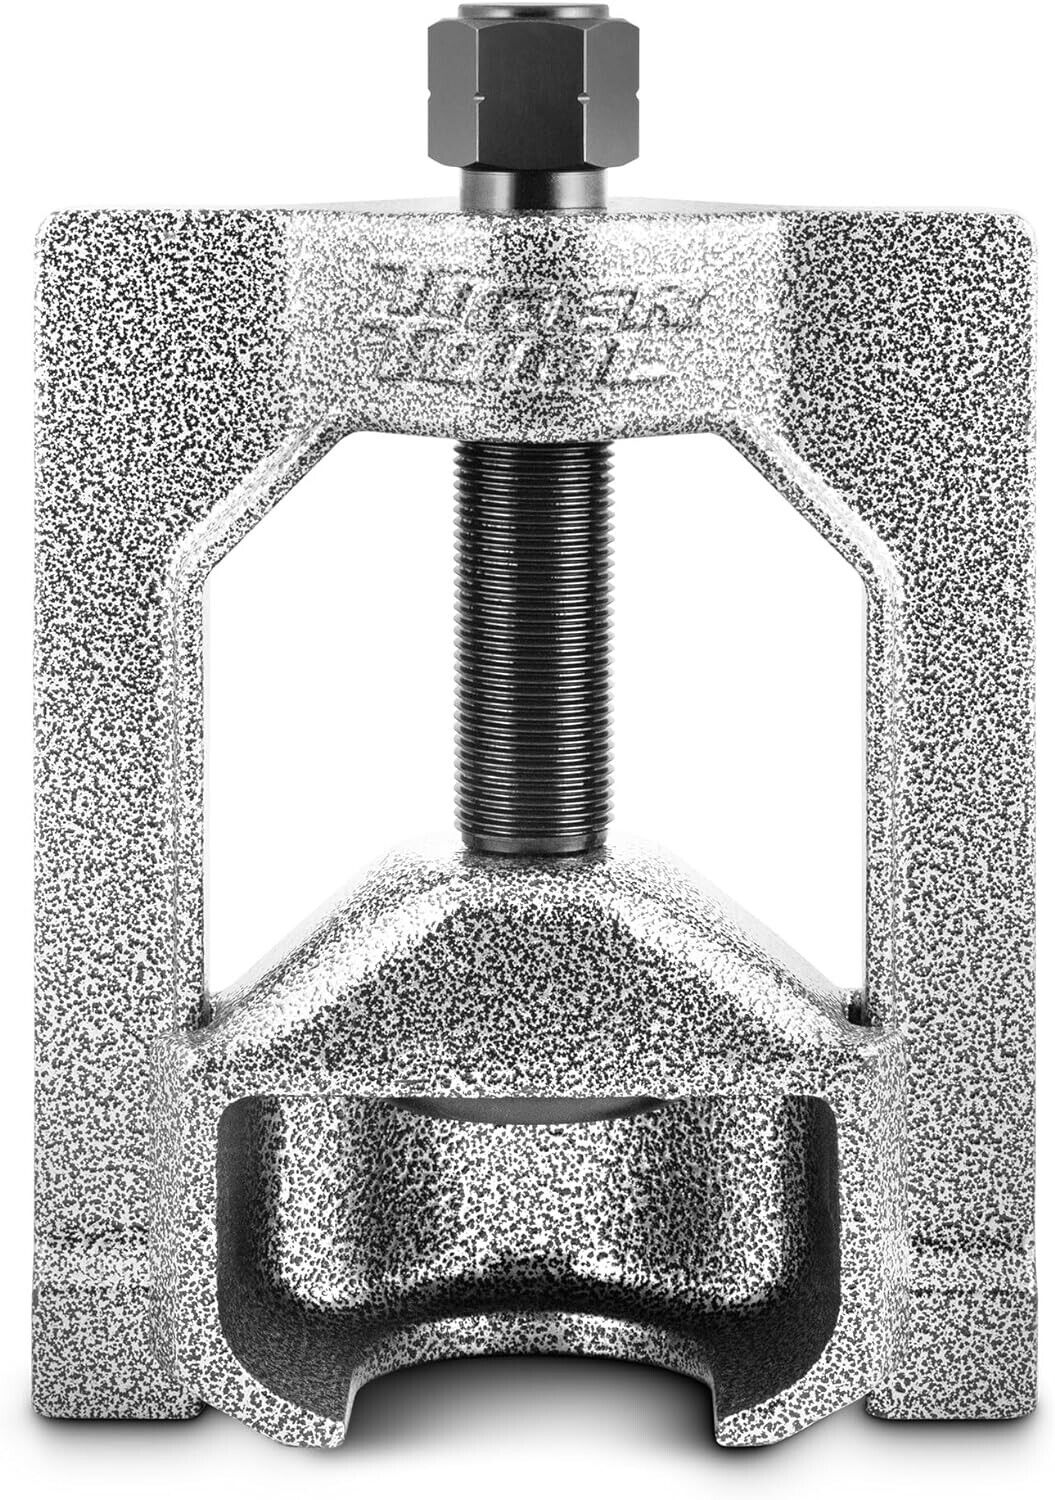 Tiger Tool Commercial U-Joint Puller Made for Heavy Duty Trucks, 10102